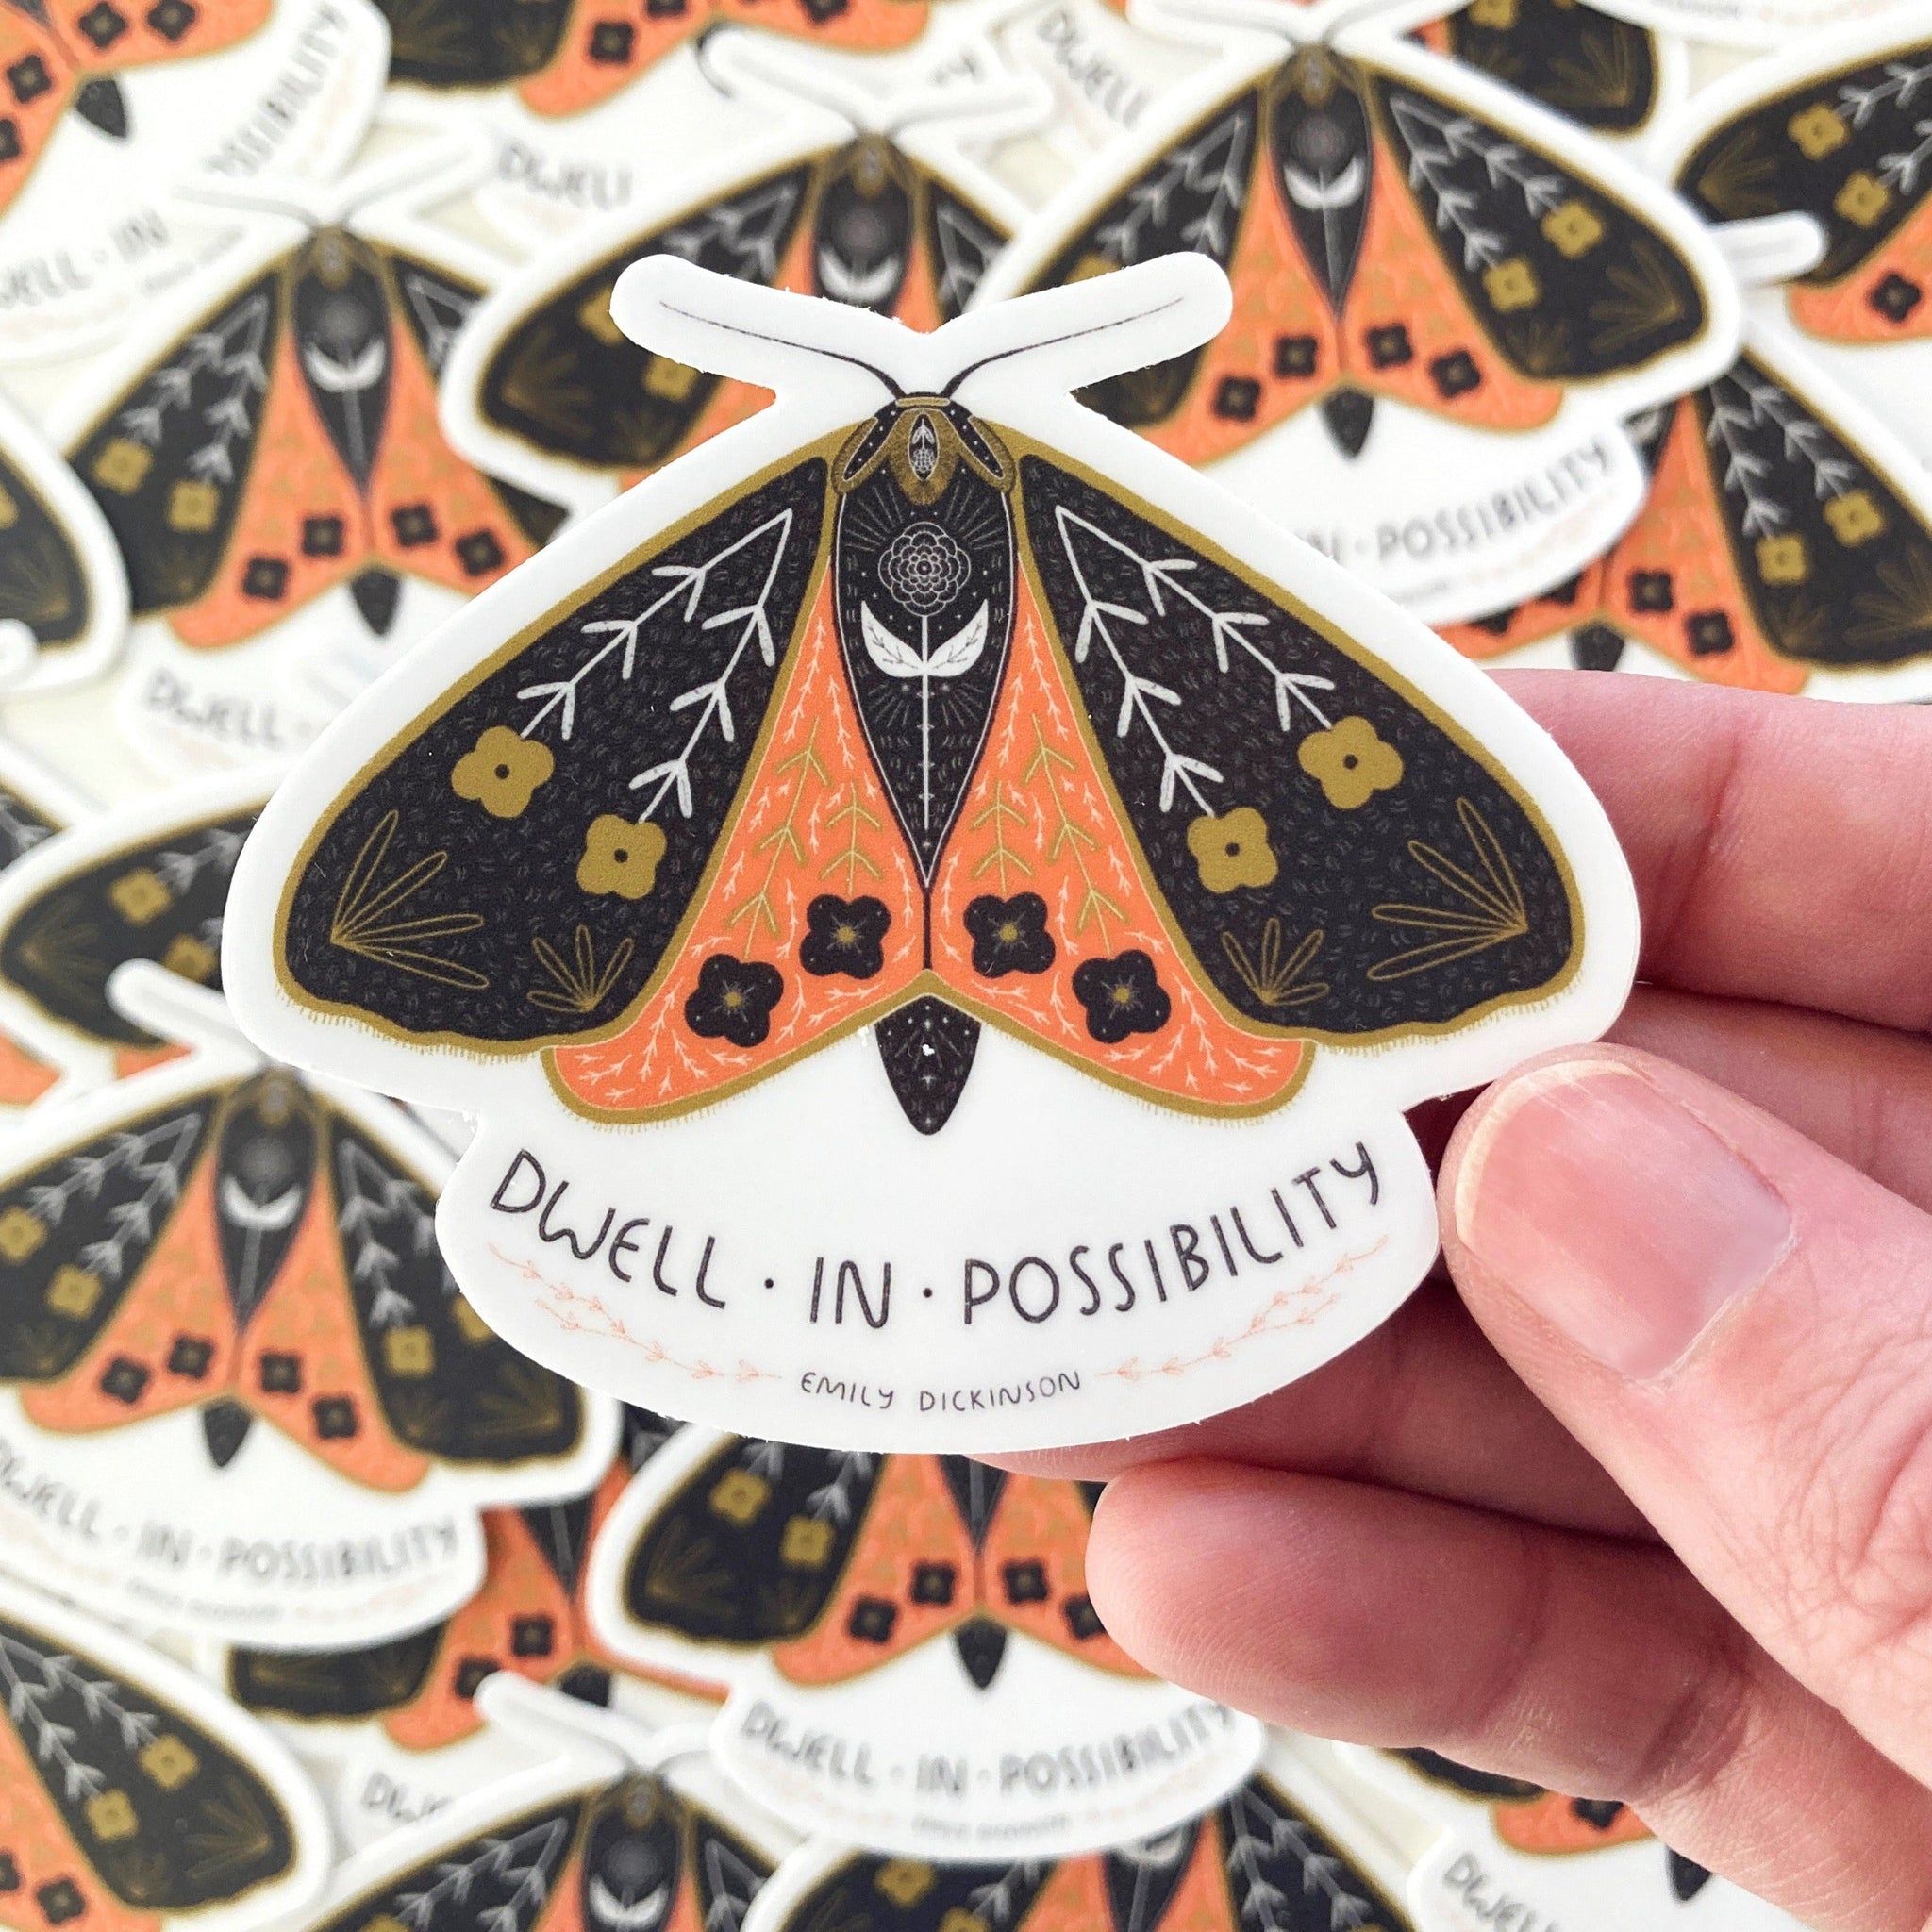 Dwell in Possibility Sticker